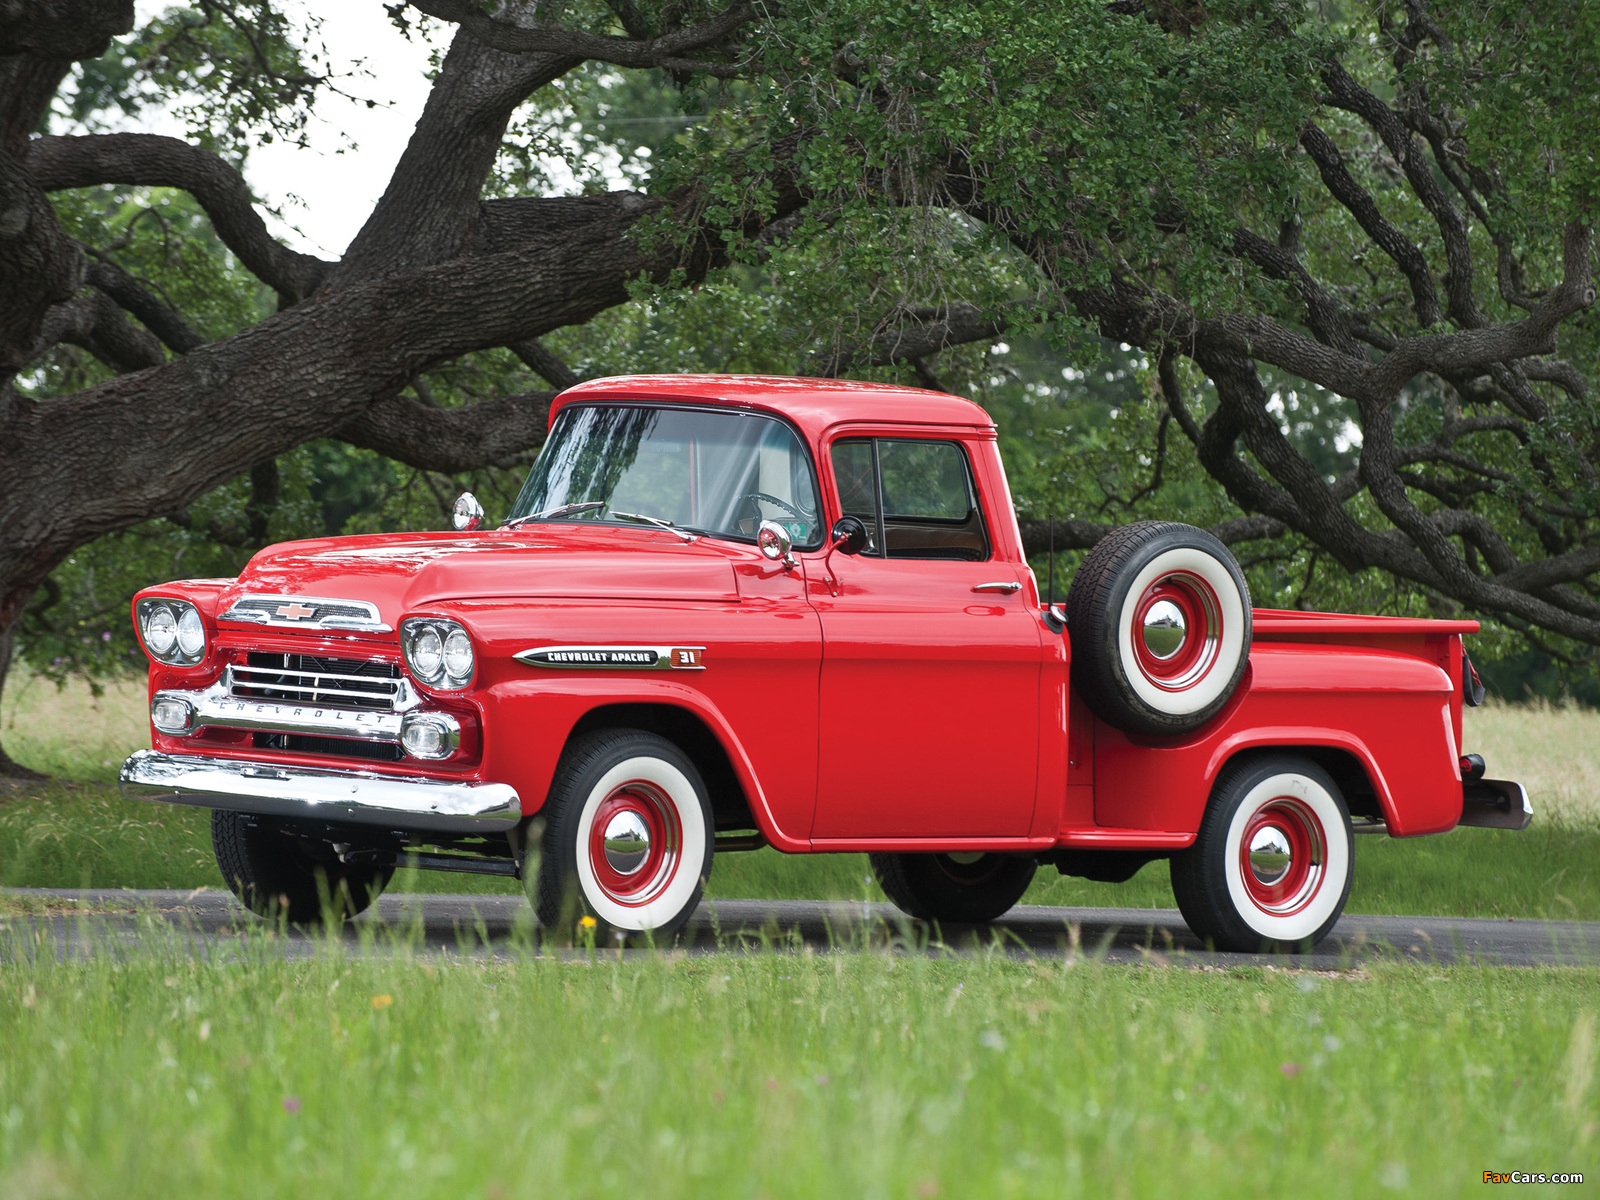 Pictures of Chevrolet Apache 31 Stepside 1959 (1600 x 1200)